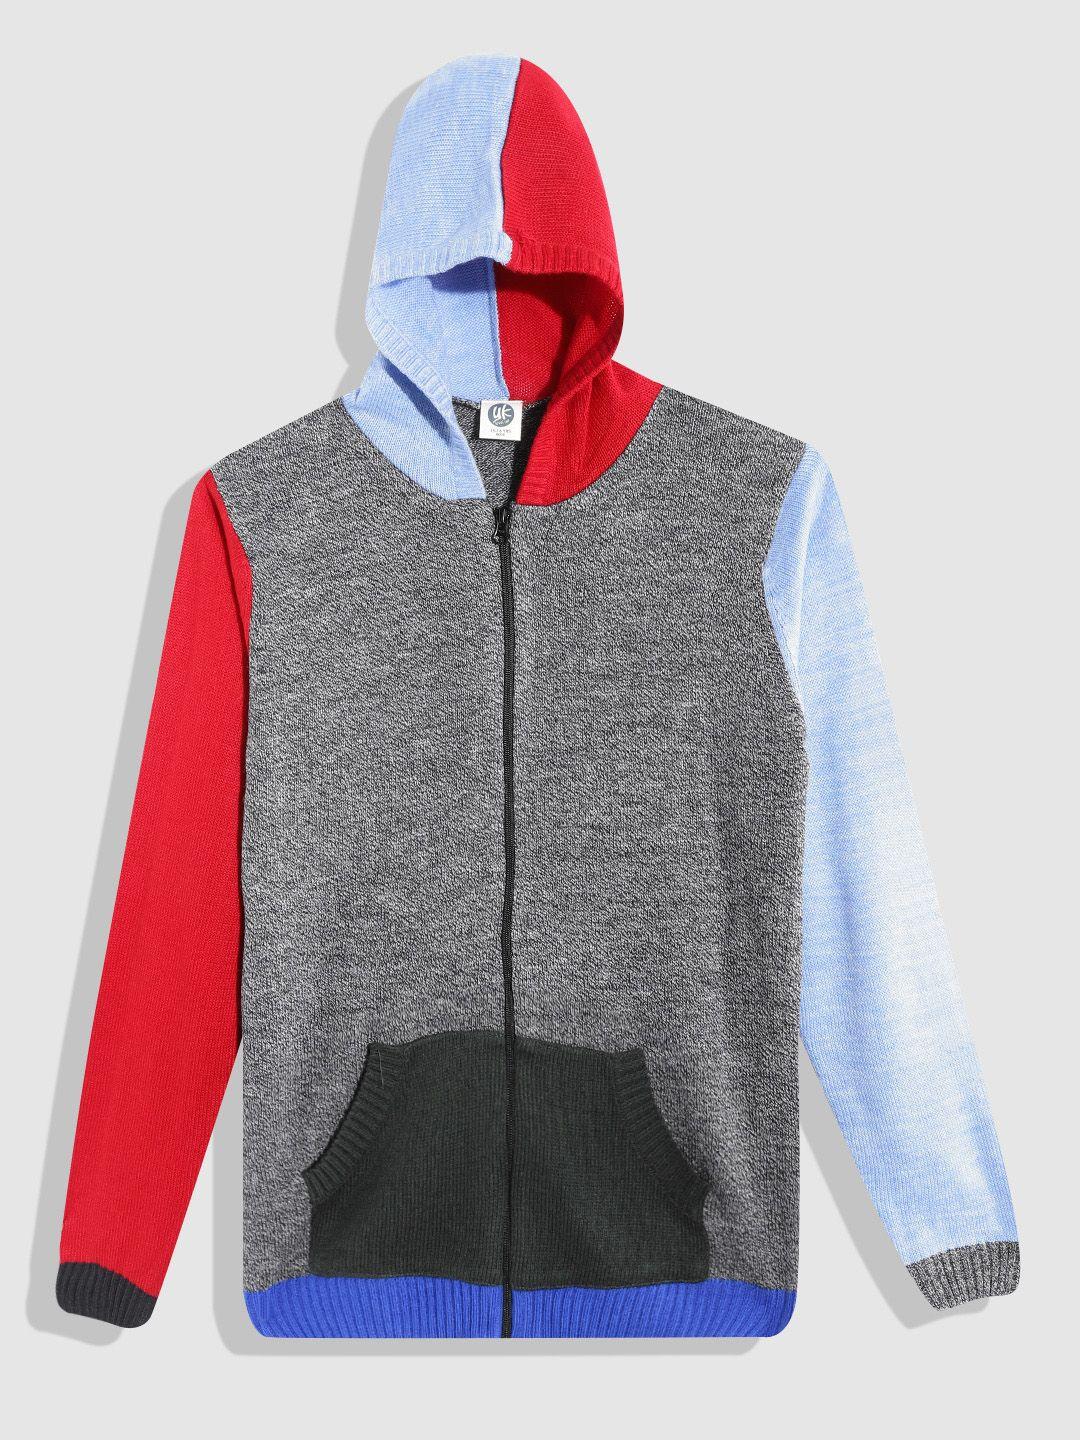 yk-boys-charcoal-&-blue-colourblocked-front-open-hooded-sweater